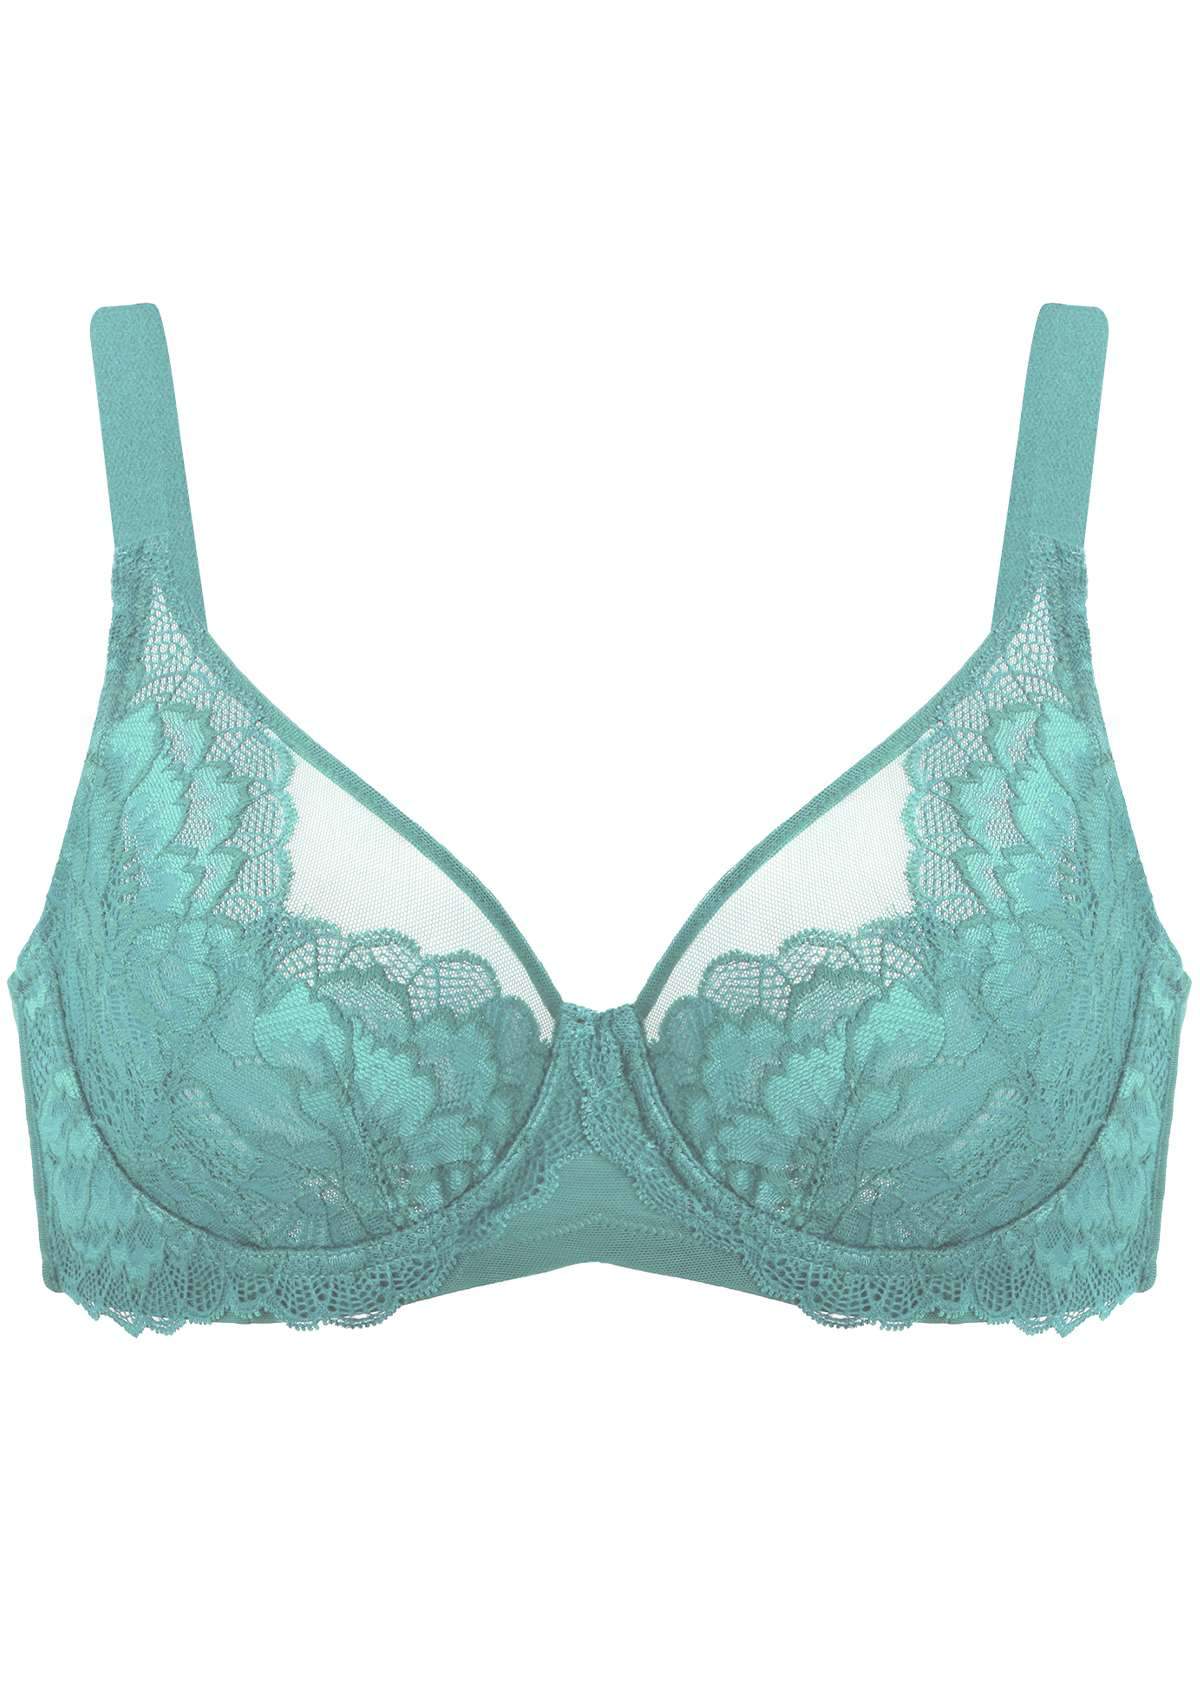 HSIA Peony Lace Unlined Supportive Underwire Bra - Dark Blue / 40 / C